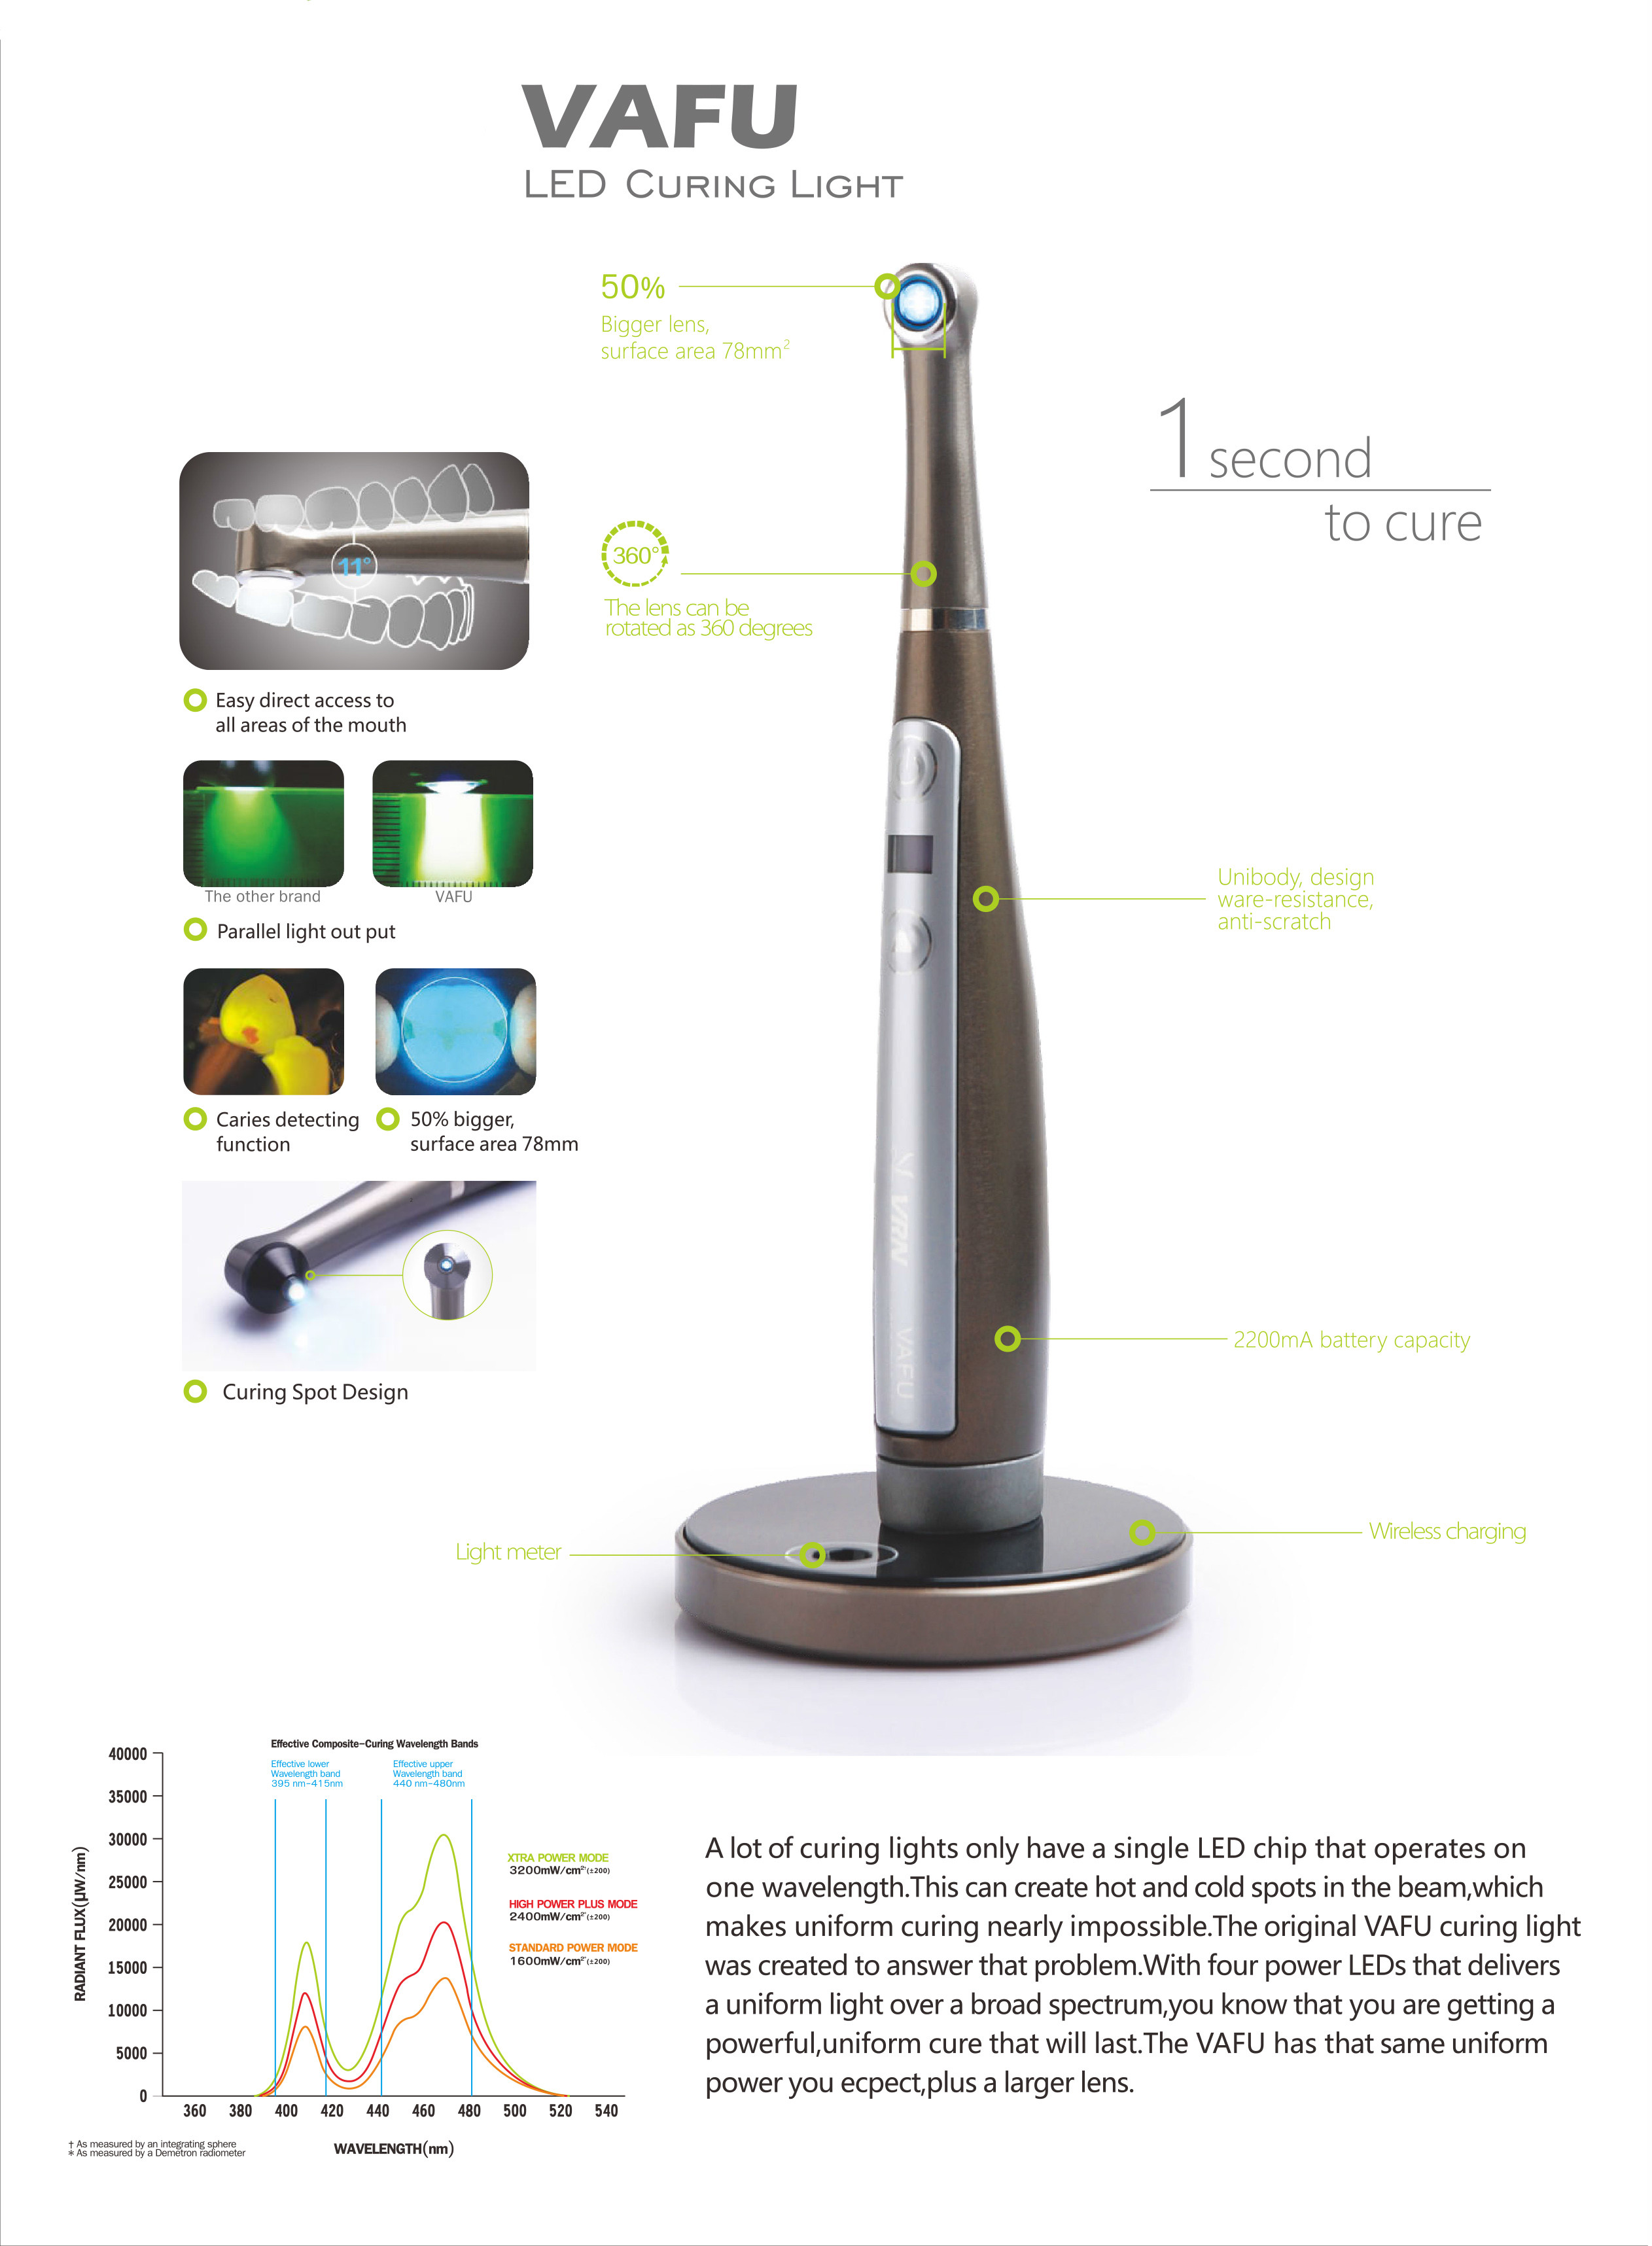 VRN VAFU LED Curing Light 1 Second dental wireless curing light with Caries detecting function SE-L027